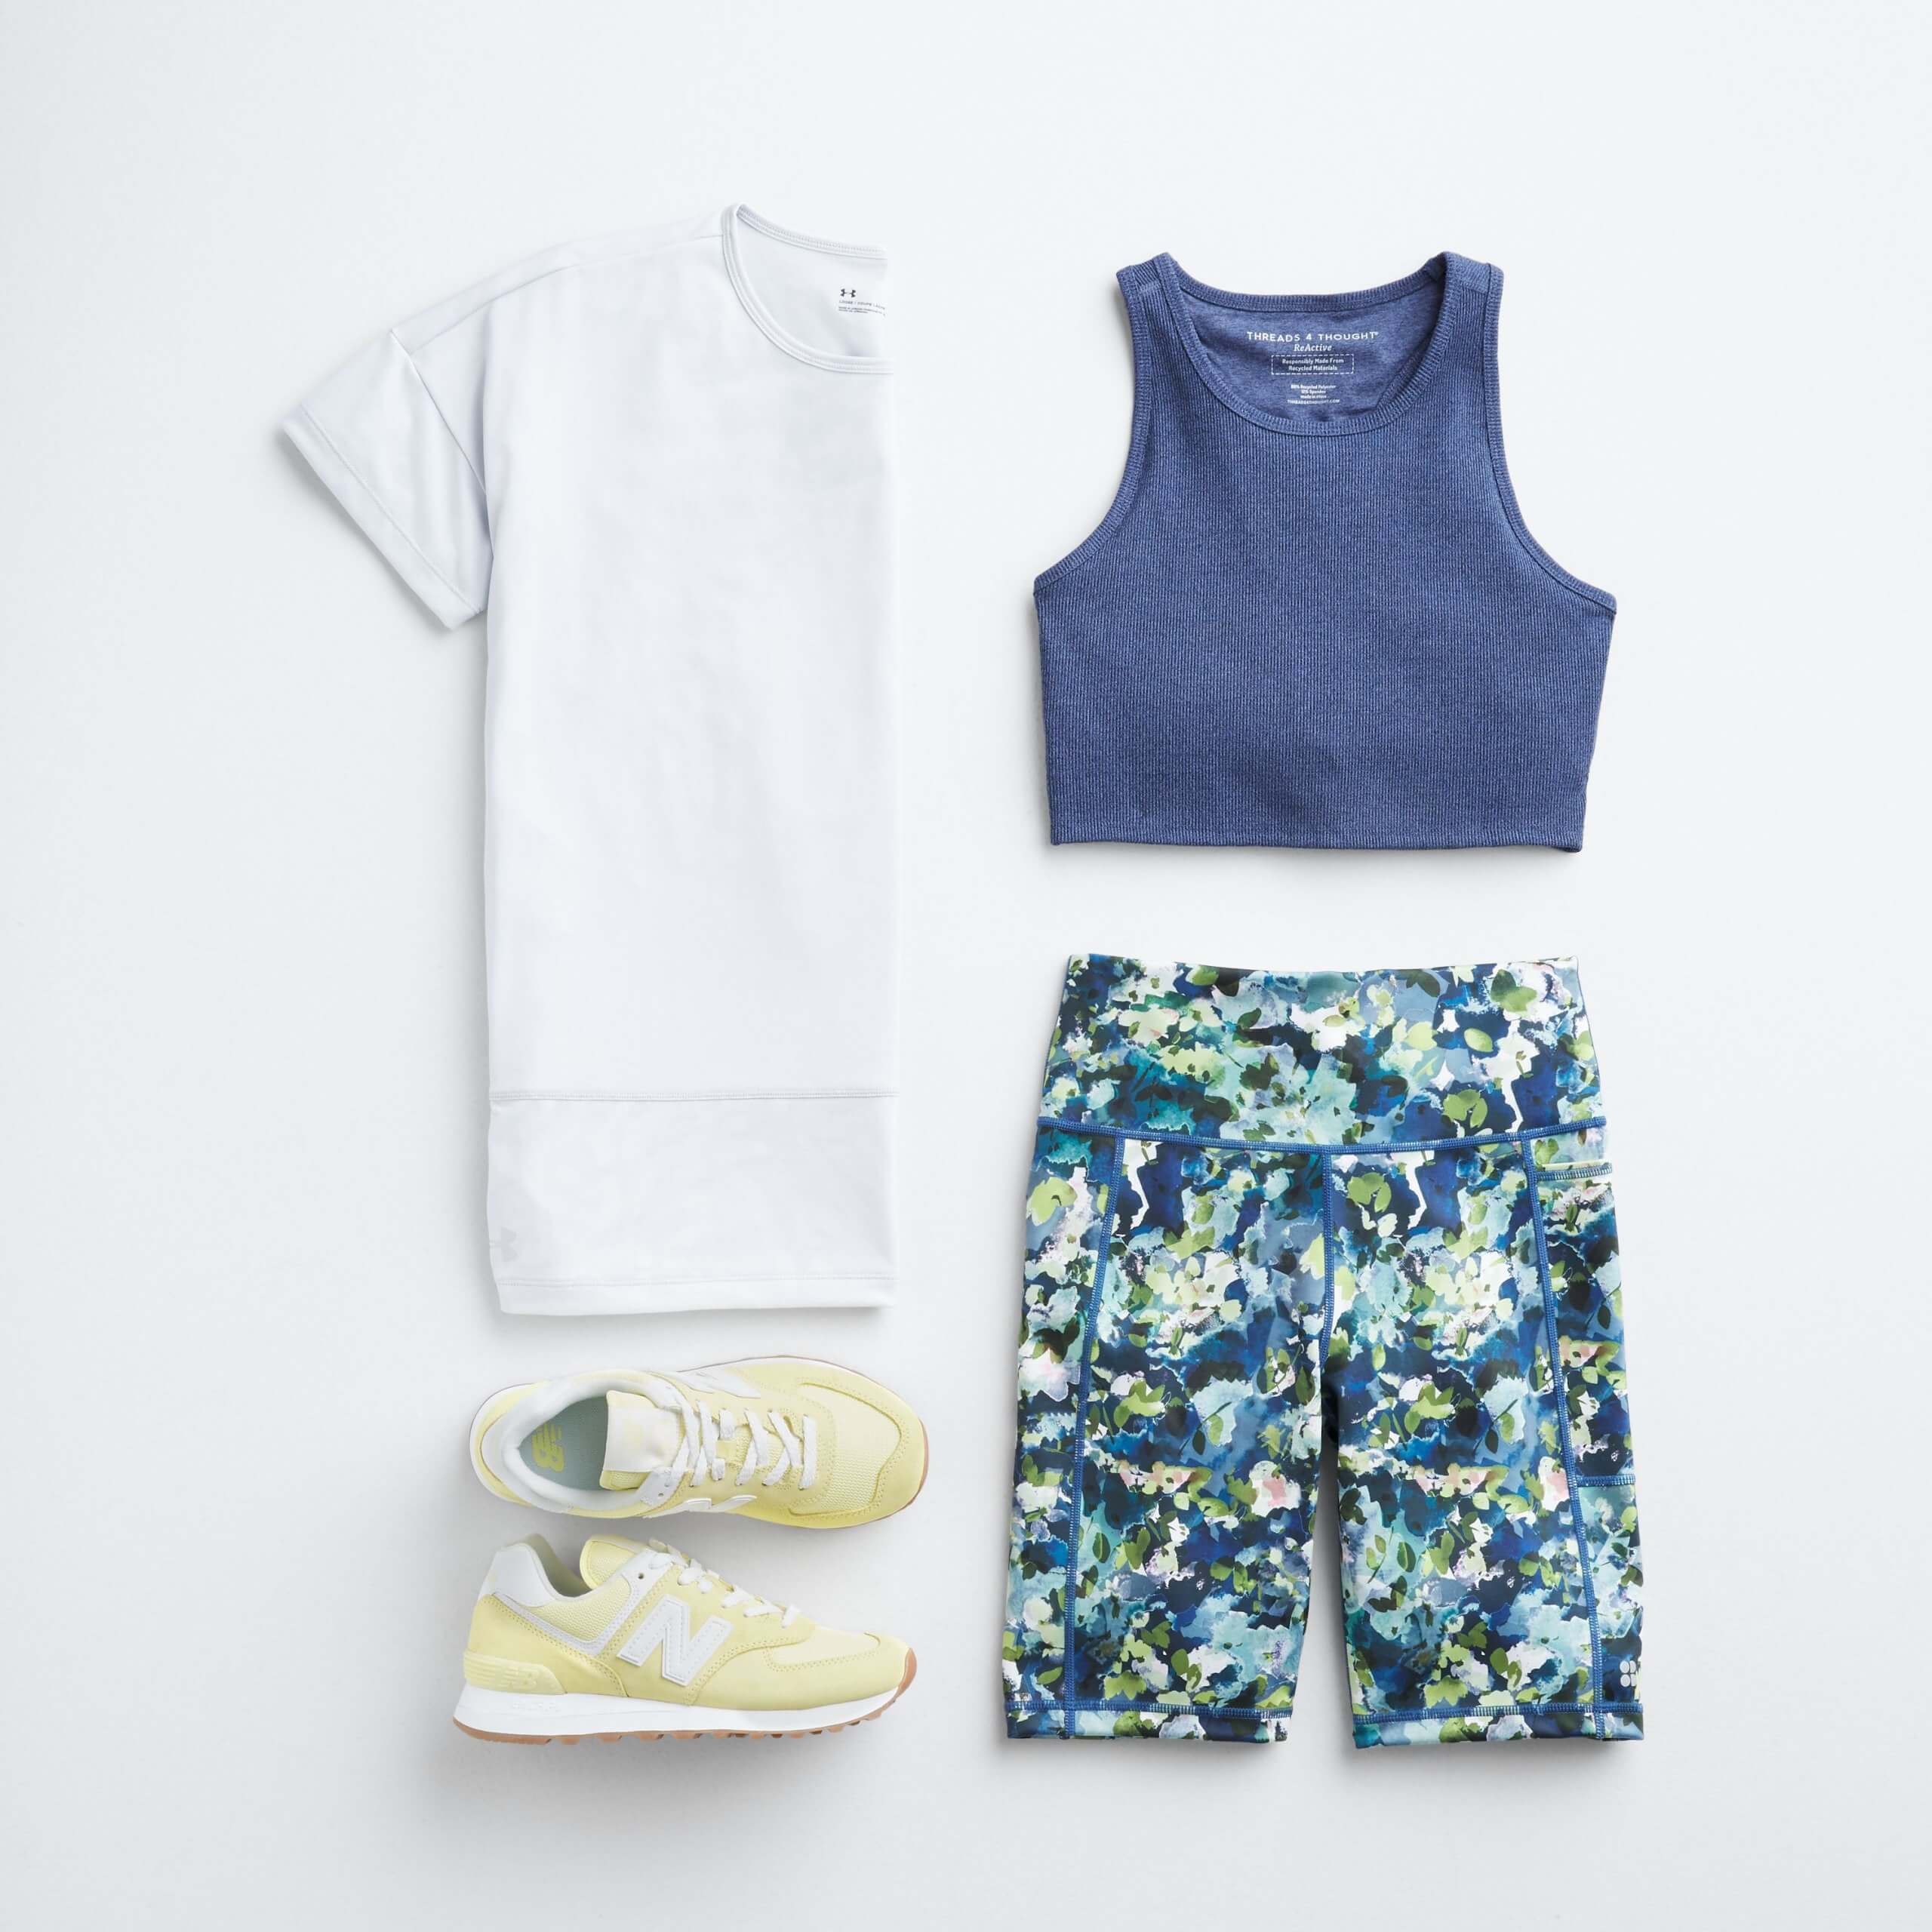 Stitch Fix Women’s outfit laydown featuring white performance tee, blue sports bra, blue white and green splatter-print yoga shorts and yellow sneakers. 